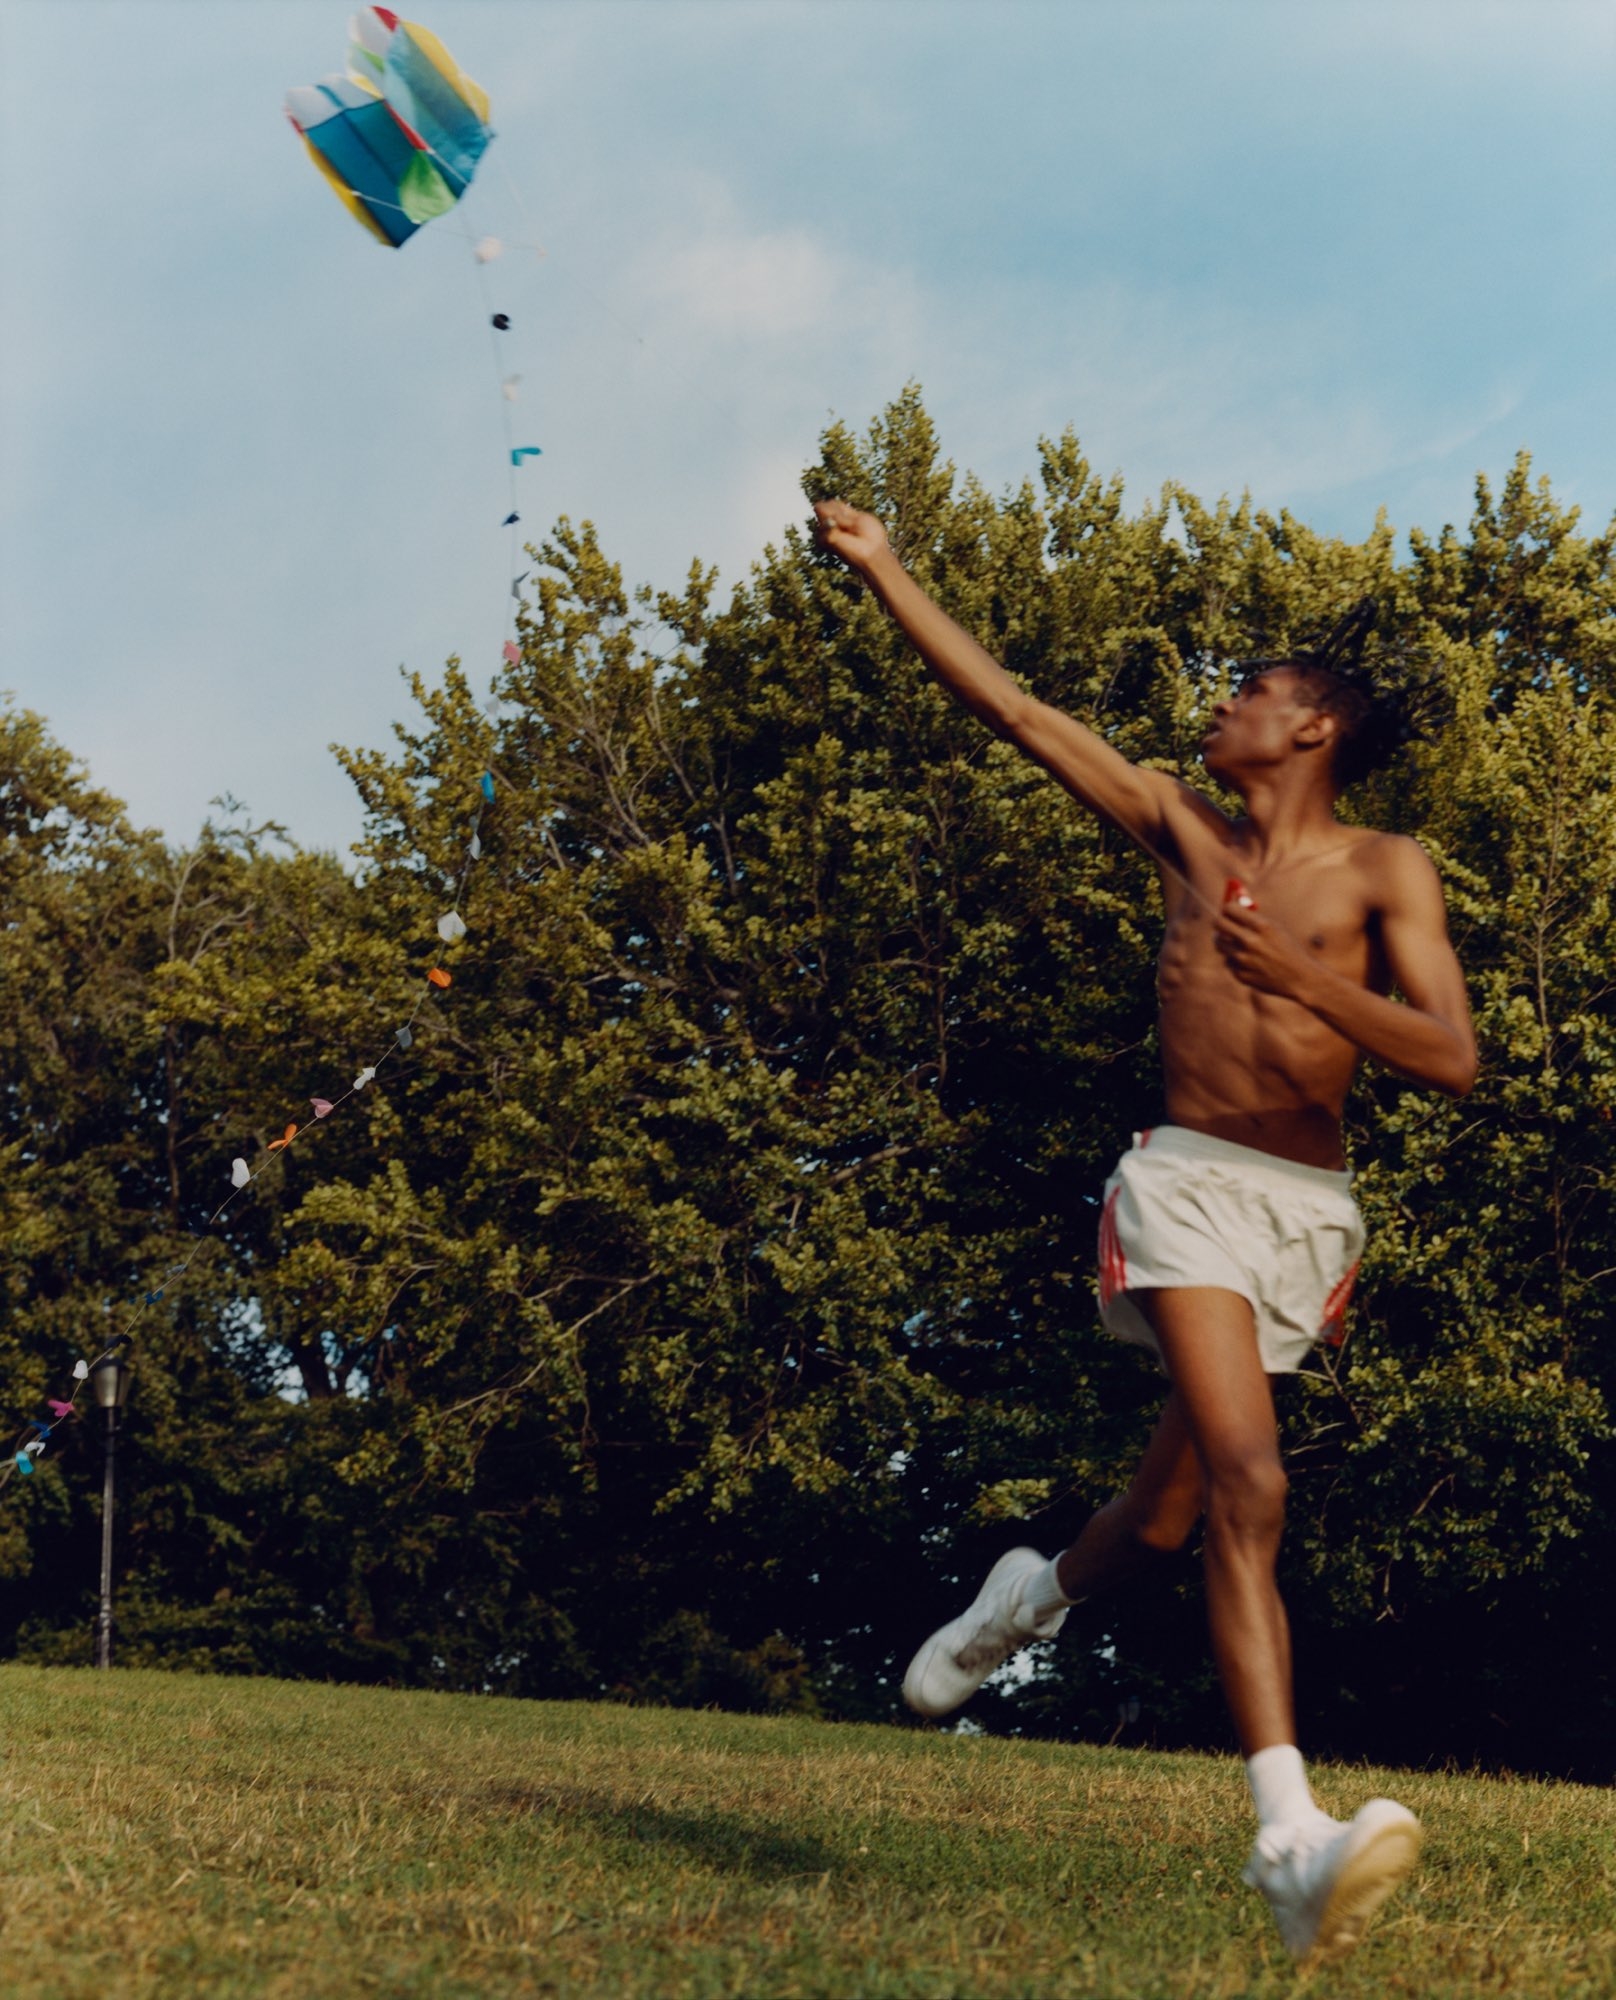 Color photo of an adolescent boy mid-leap with a kite in a field